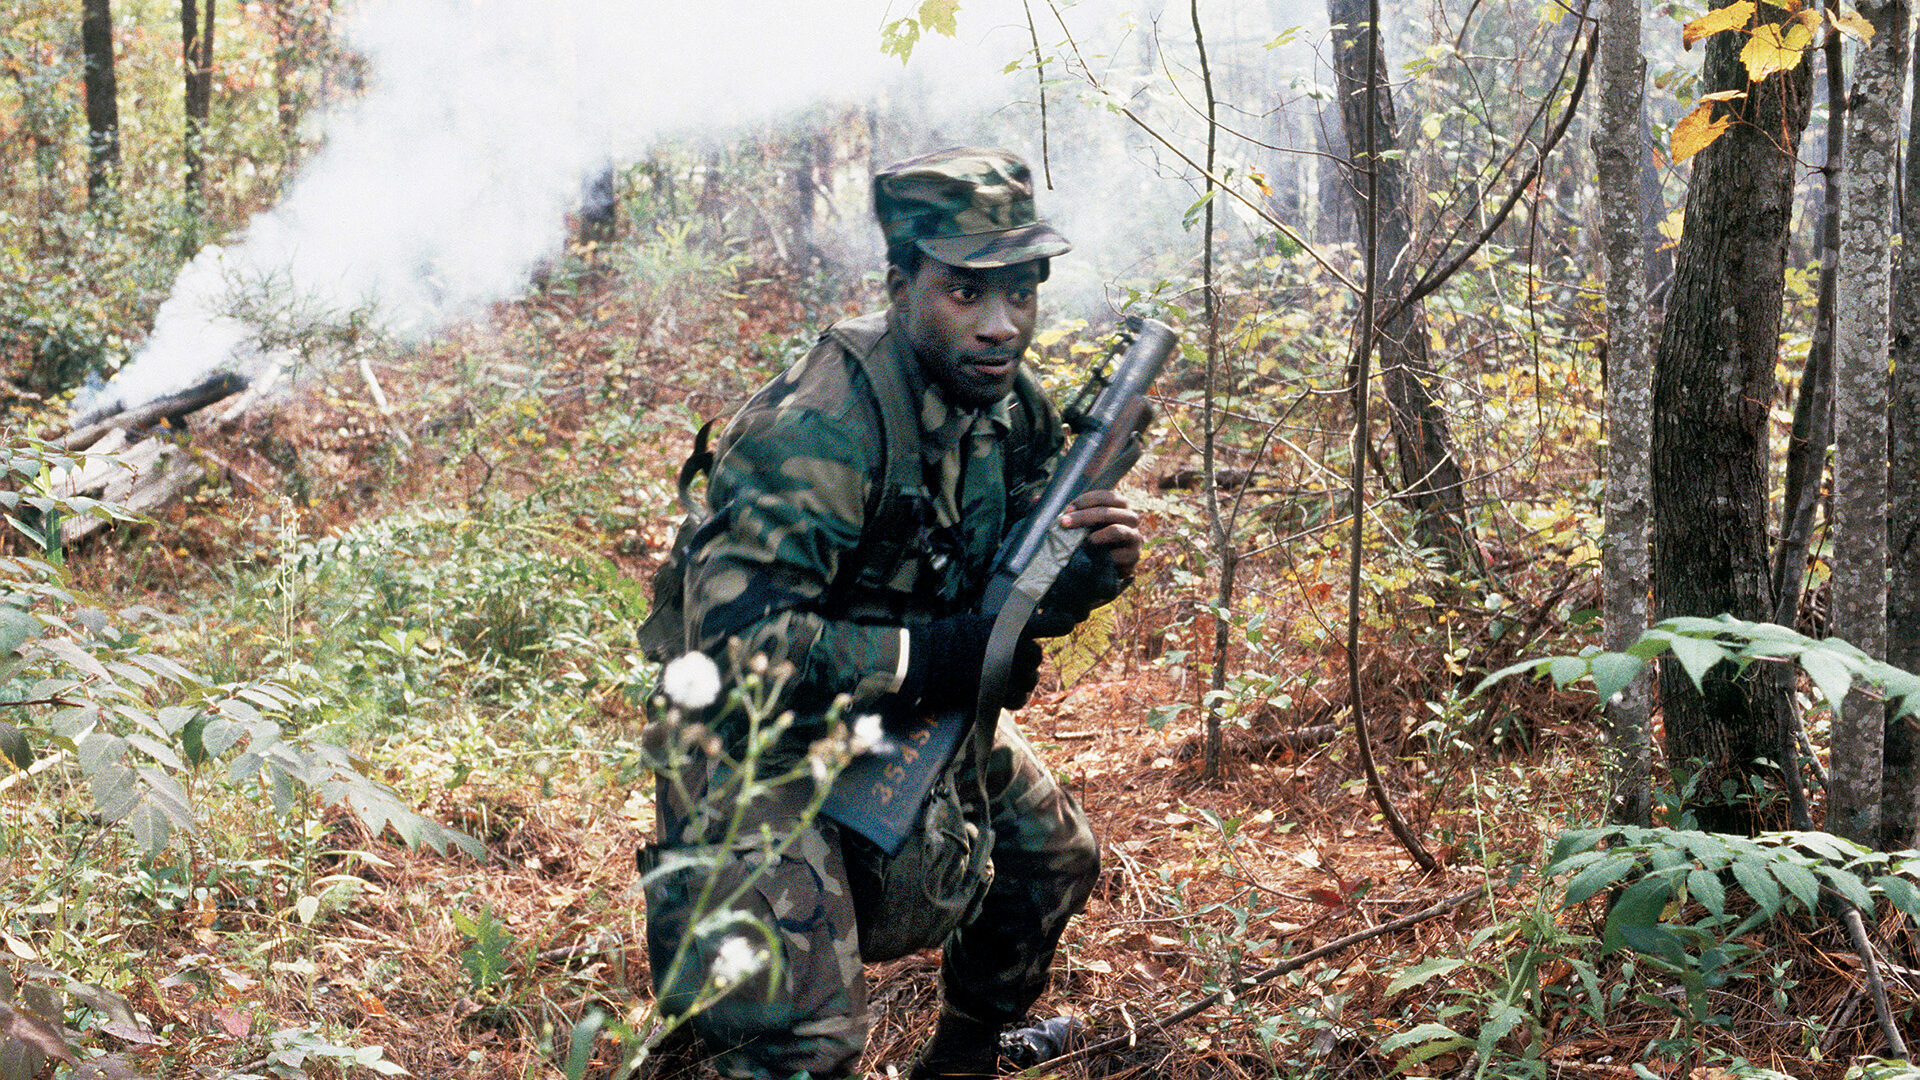 A U.S. airman belonging to a security squadron trains with an M-79. Although most commonly associated with the Vietnam War, the sturdy grenade launcher also saw action in the 1982 Falklands War and is still in the inventory of many armed forces around the globe.